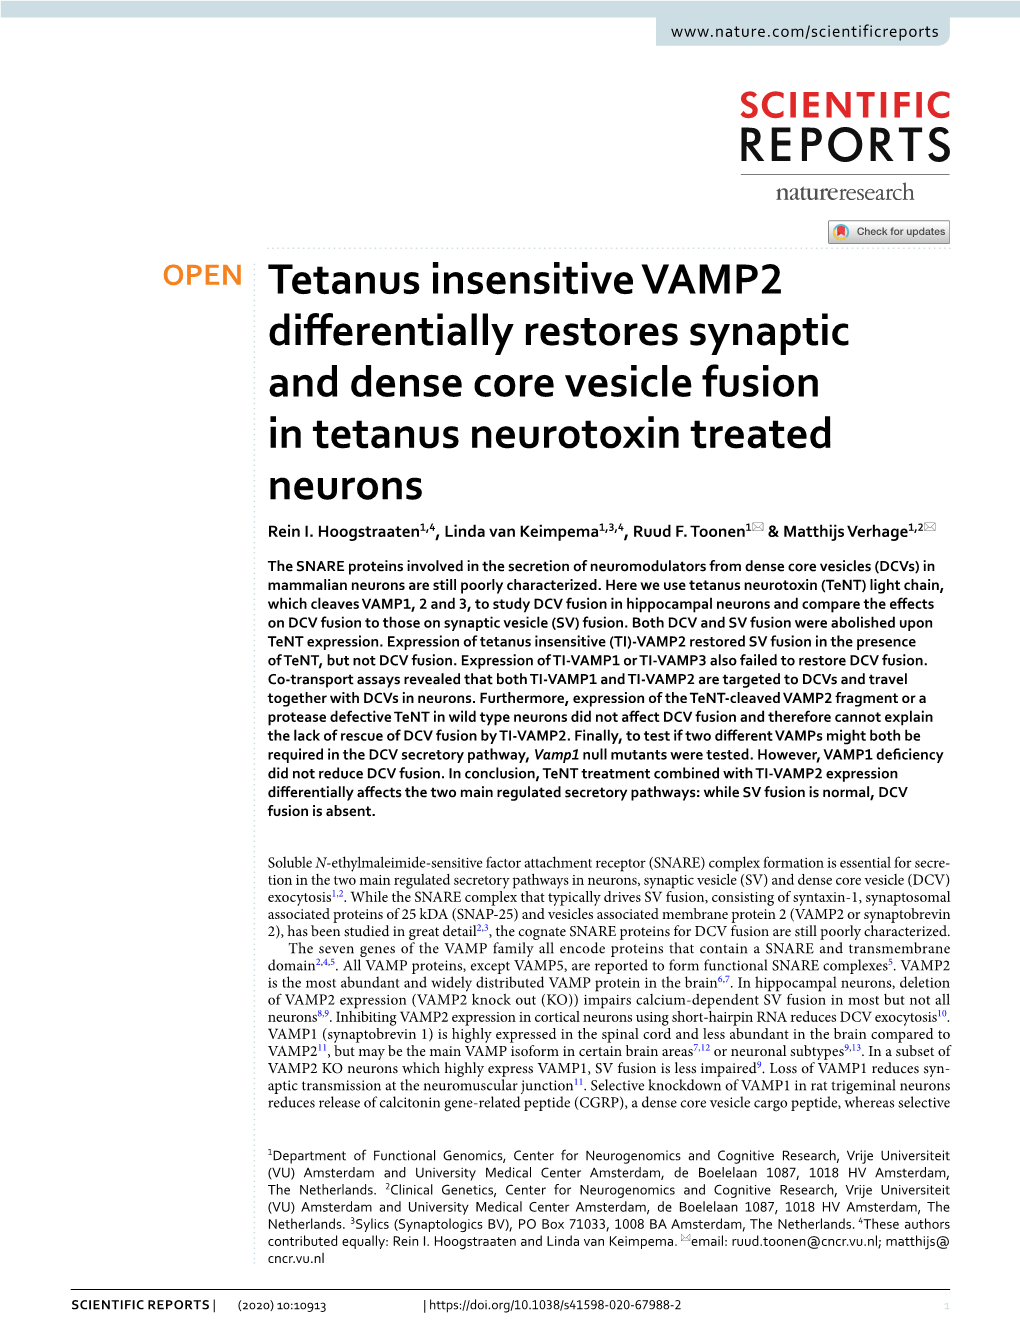 Tetanus Insensitive VAMP2 Differentially Restores Synaptic and Dense Core Vesicle Fusion in Tetanus Neurotoxin Treated Neurons